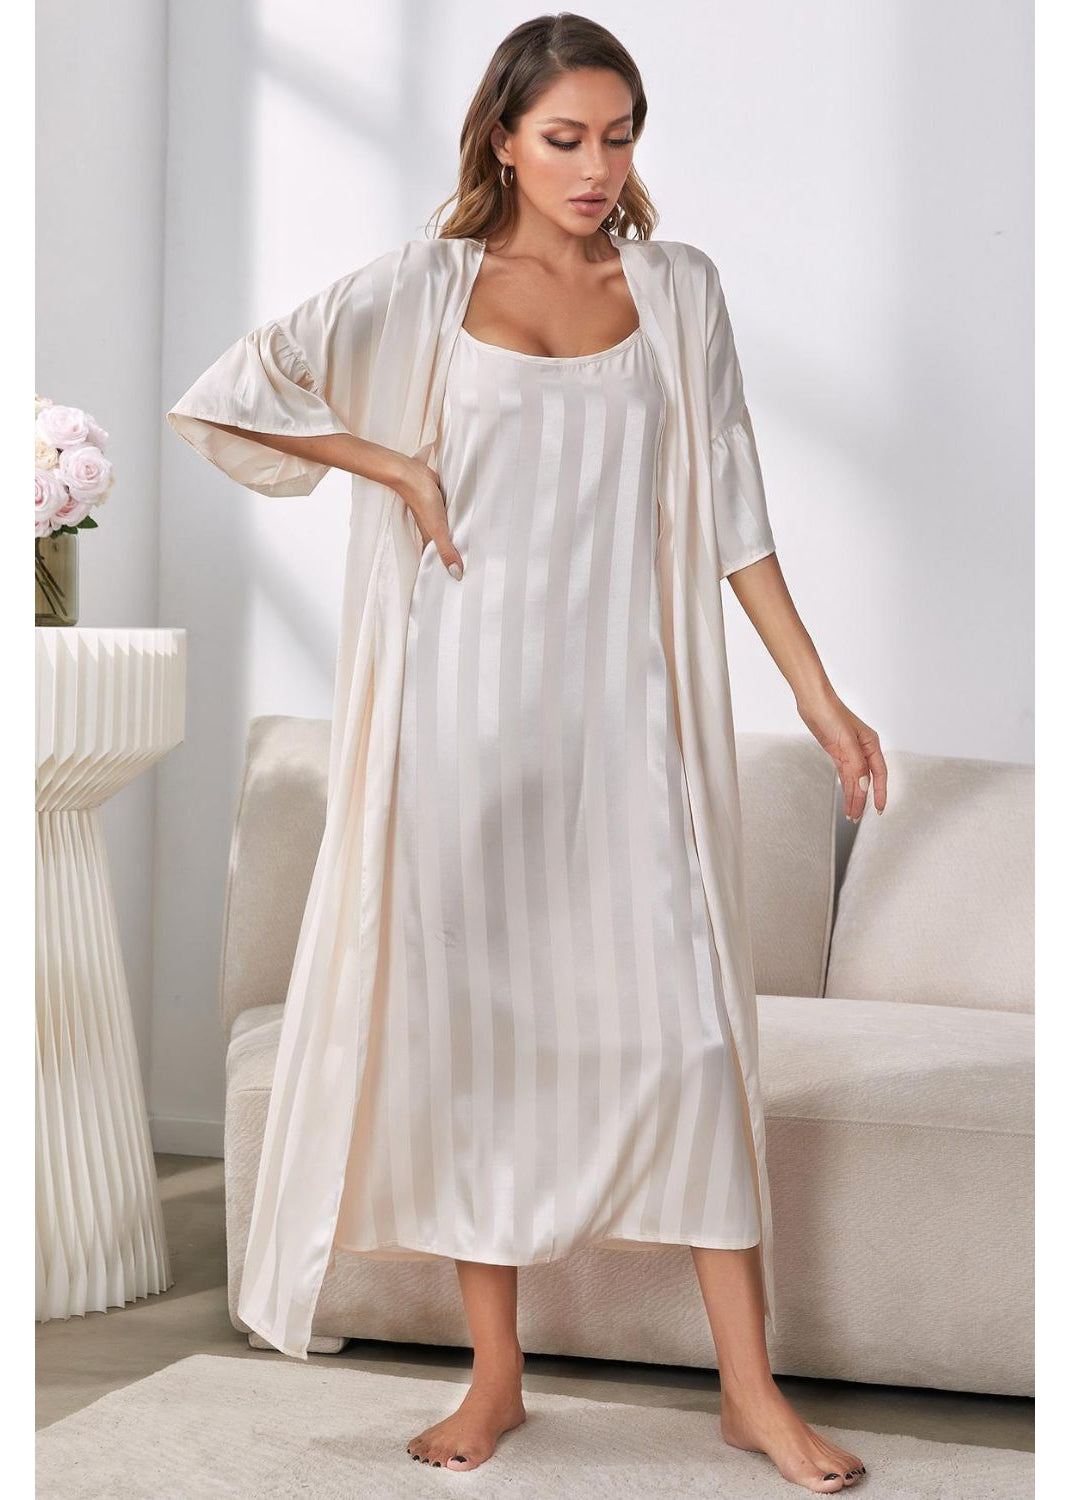 Contrast Lace Flounce Sleeve Chiffon Robe & Ruched Bust Cami Dress PJ Set